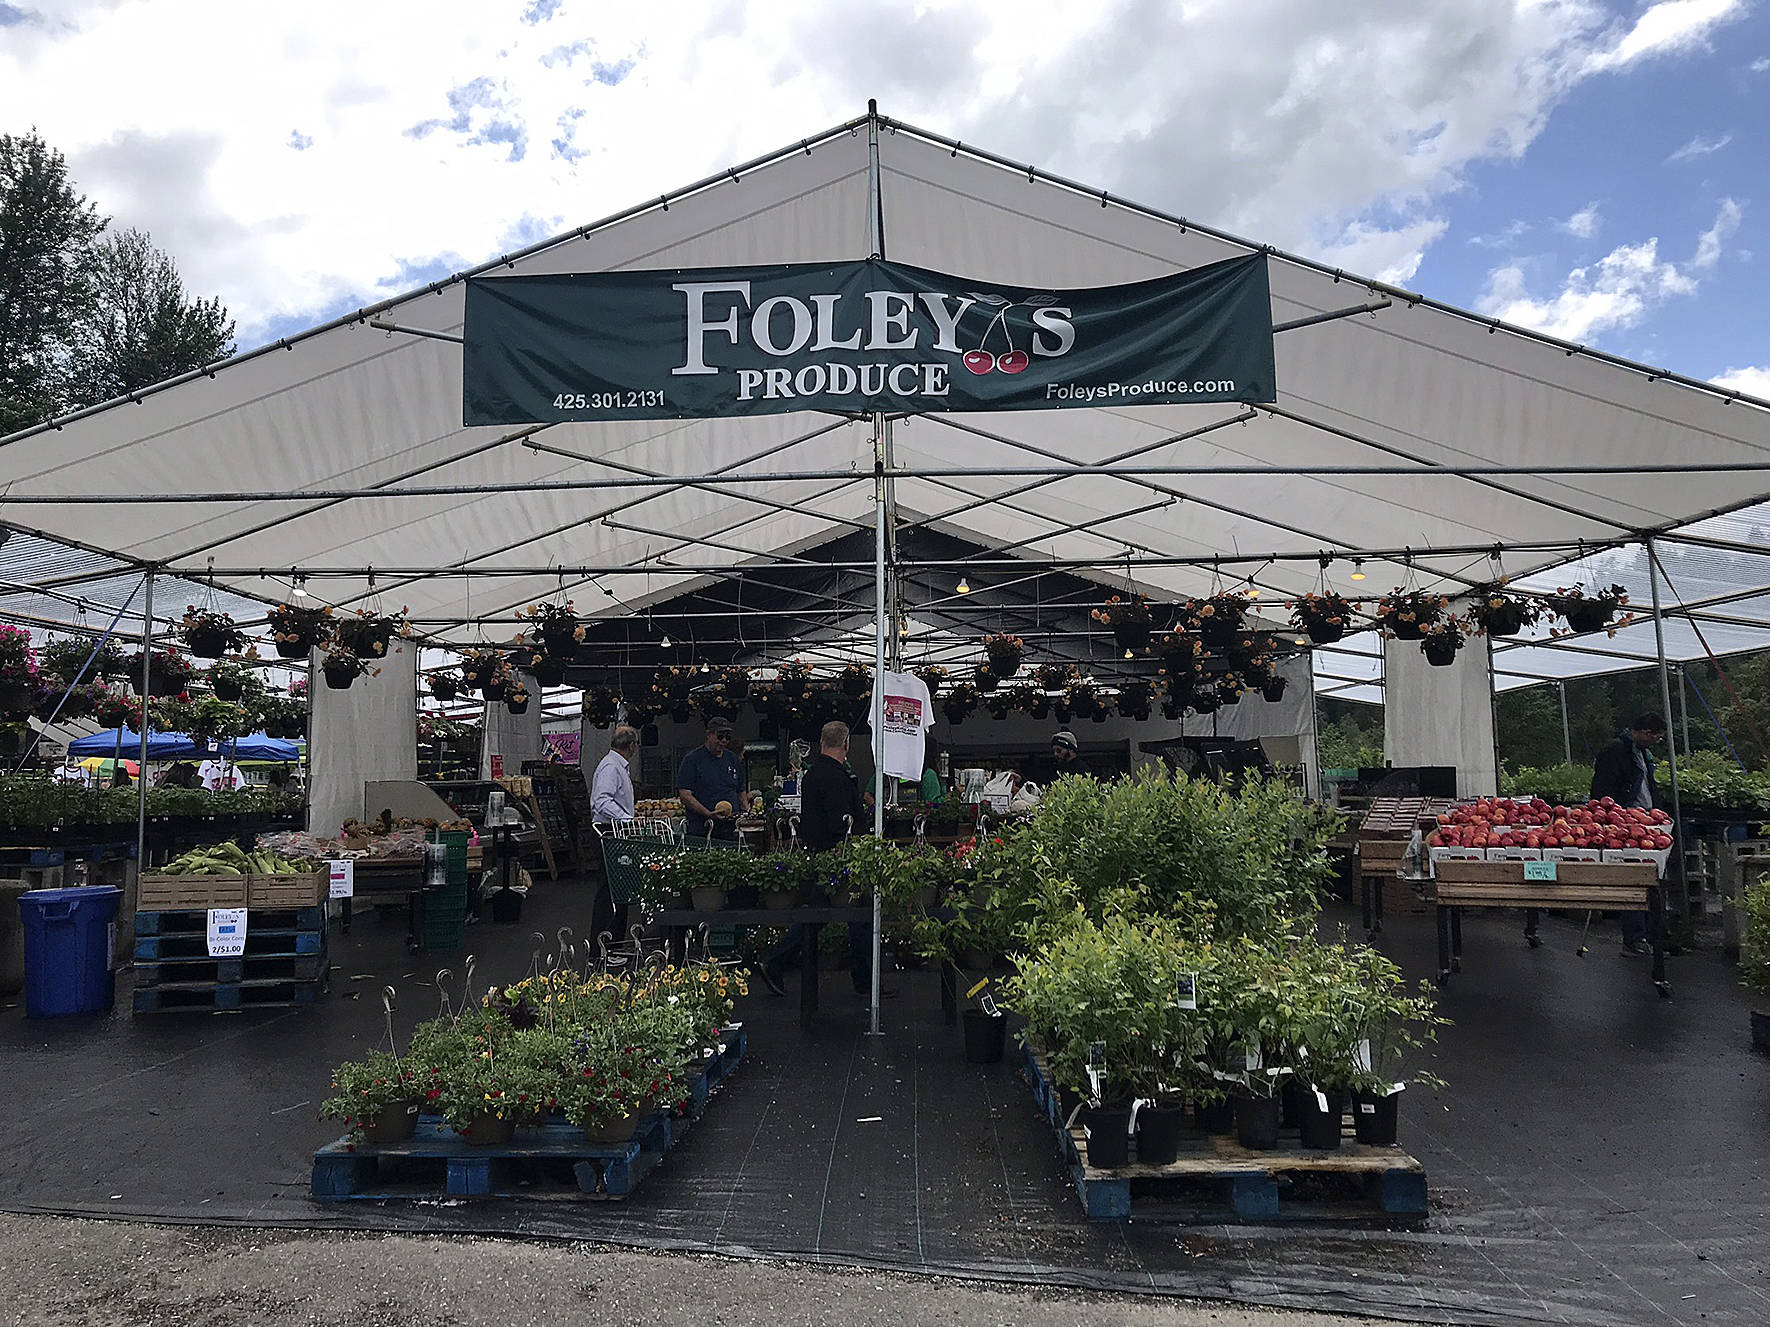 Photo by Kayse Angel                                 The Foley’s Produce Stand was established in 2005 and has been serving the community off Highway 169 since then.